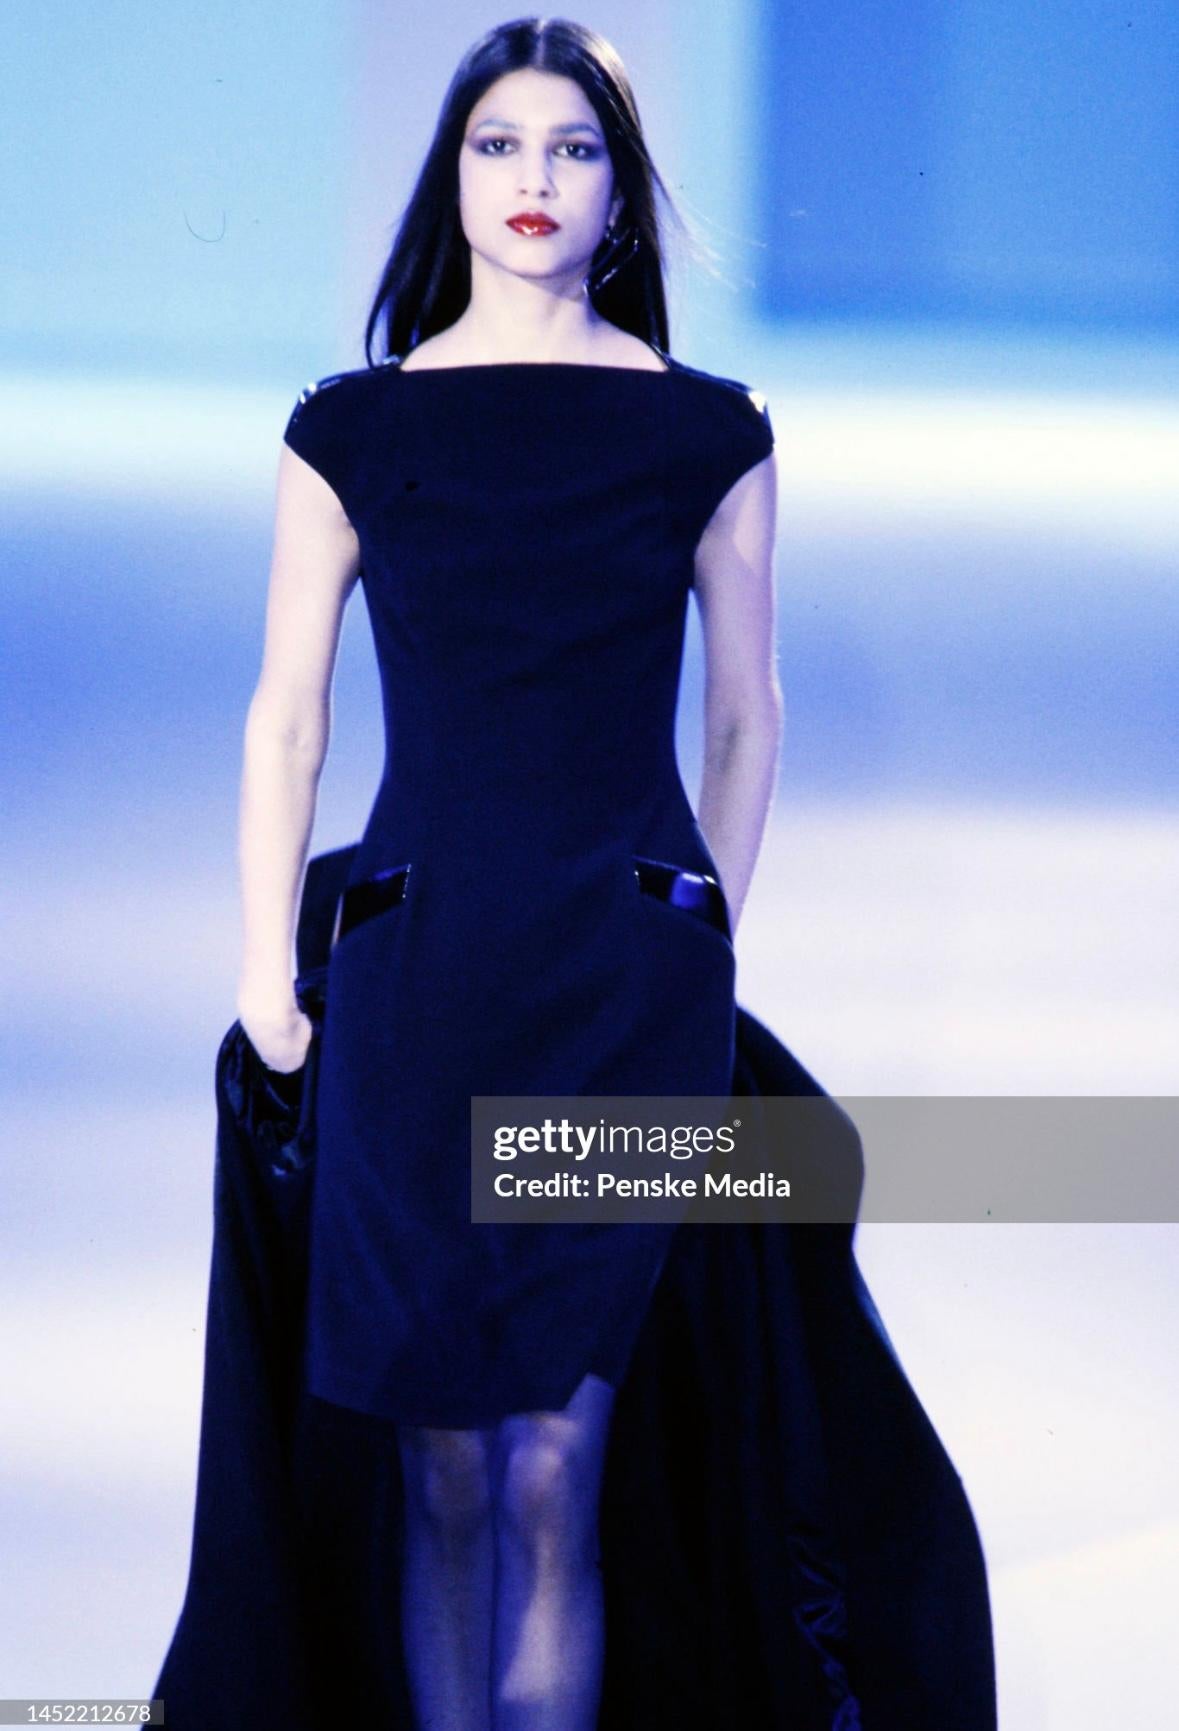 Presenting a fabulous black Thierry Mugler dress, designed by Manfred Mugler. From the Fall/Winter 1998 collection, this chic little black dress debuted on the season's runway. This LBD features petal sleeves, a boat-style neckline, and is made